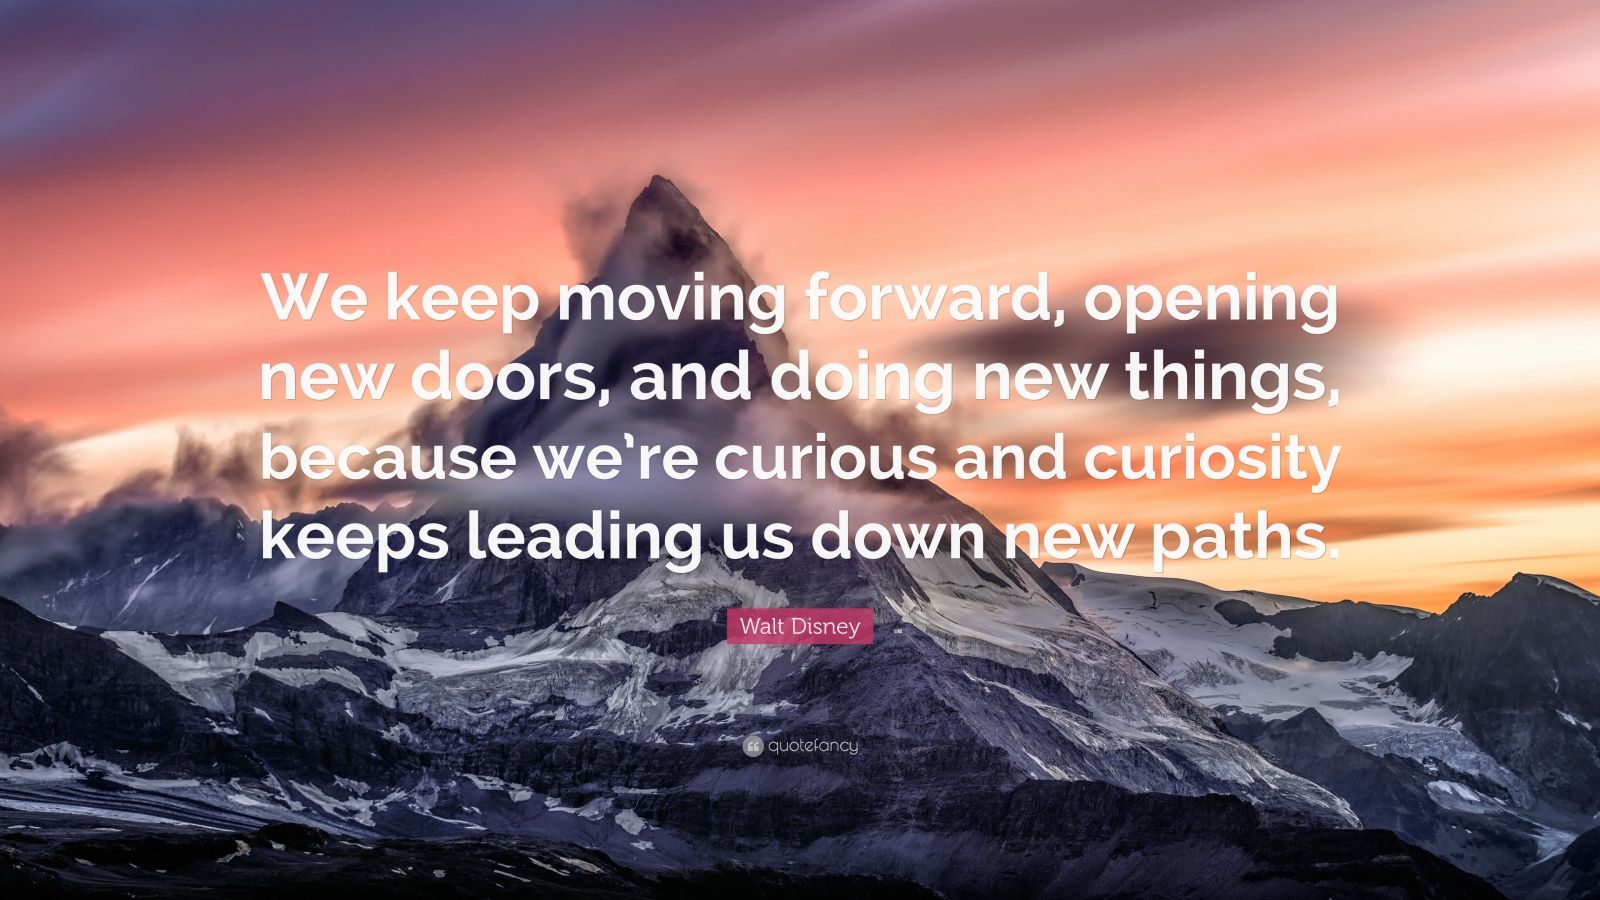 walt disney curiosity leads us to new paths meaning